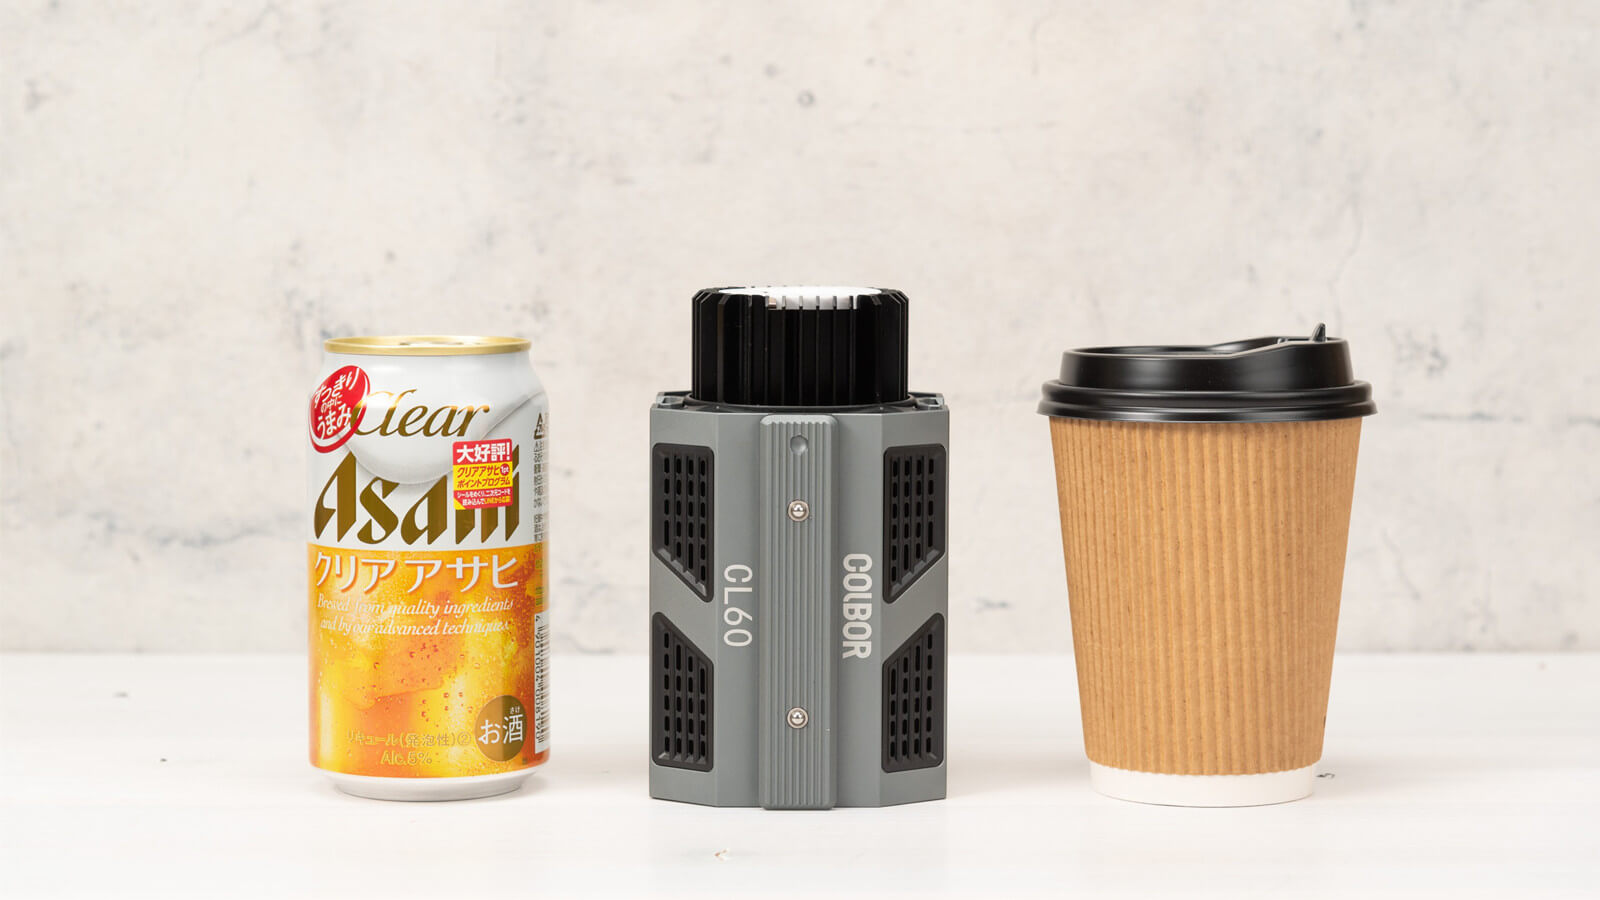 COLBOR CL60 LED videography light is as compact as a coffee cup.